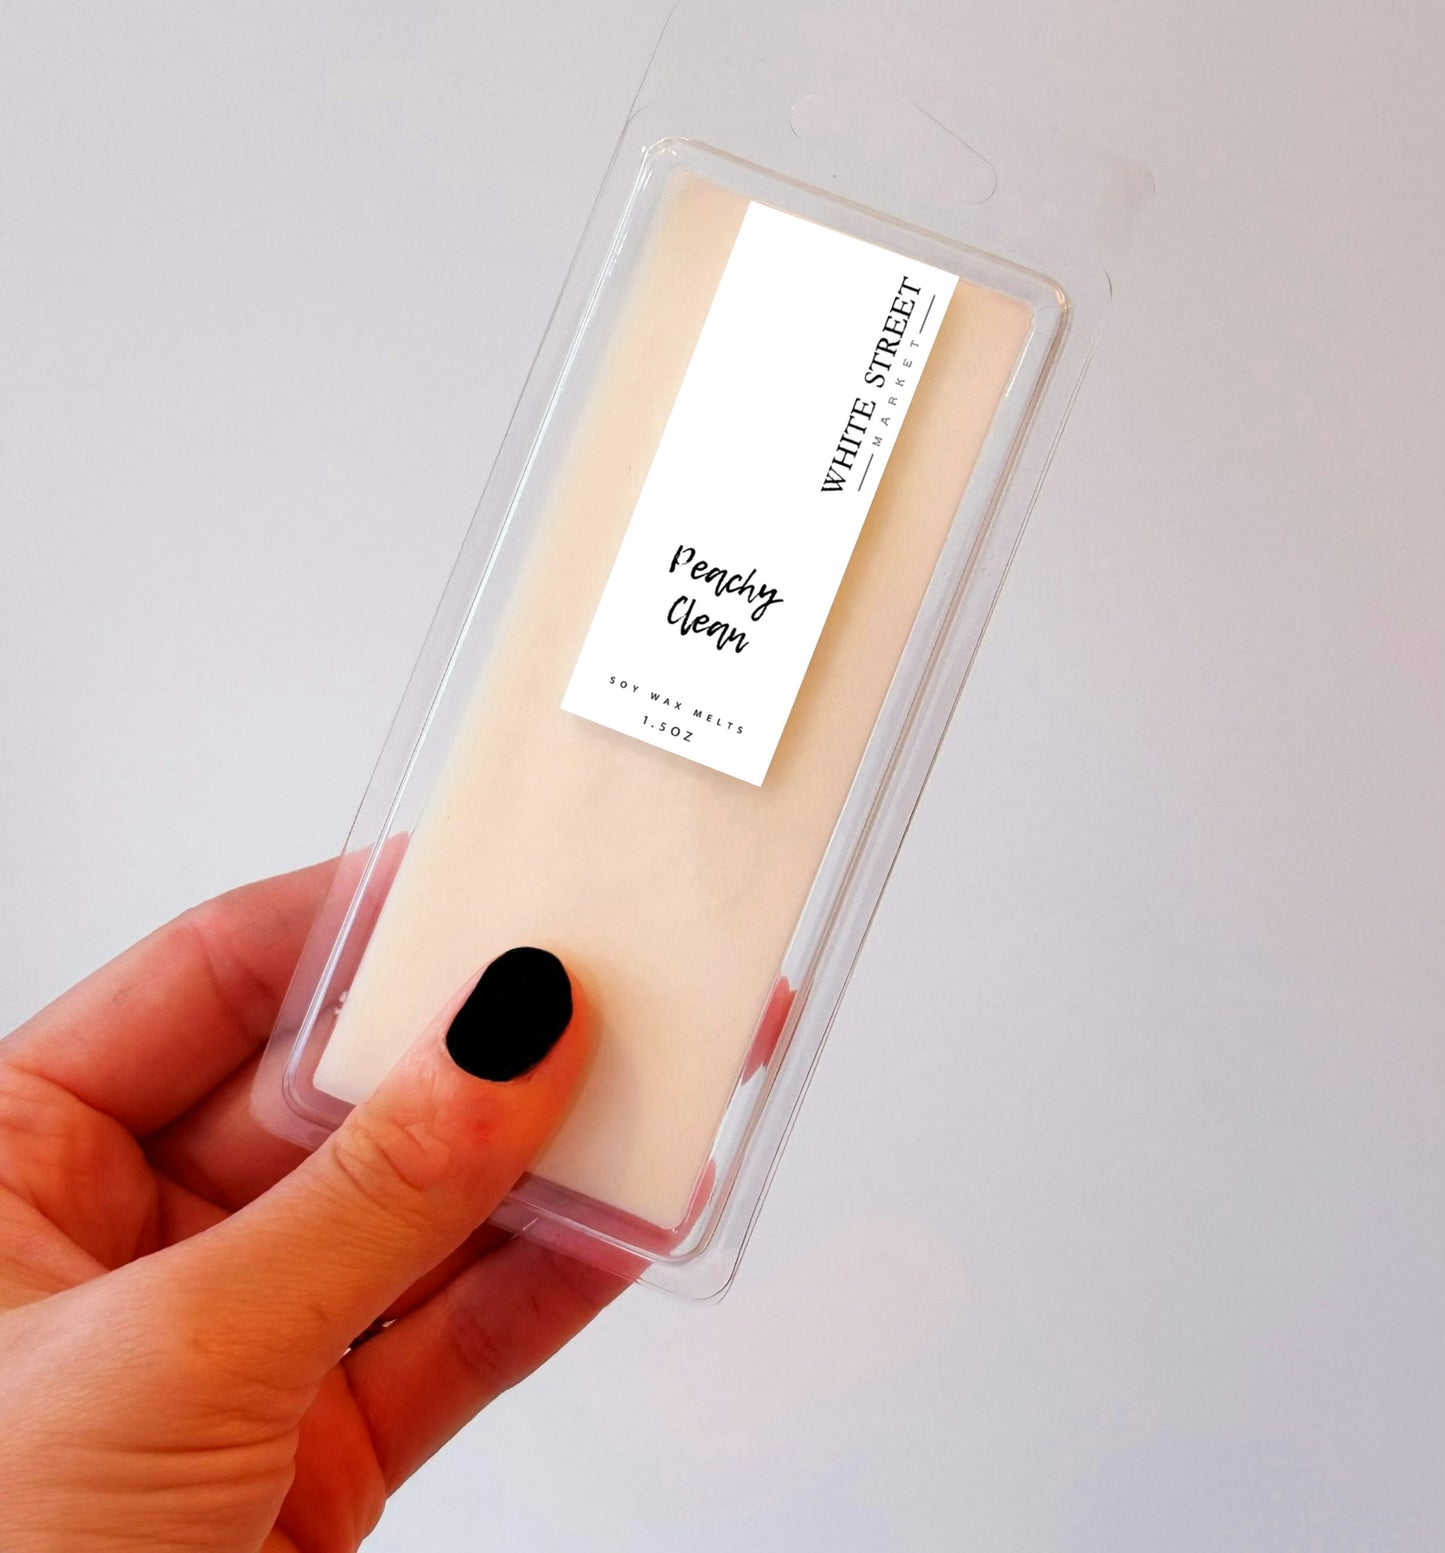 Load image into Gallery viewer, Peachy Clean Wax Melts - White Street Market
